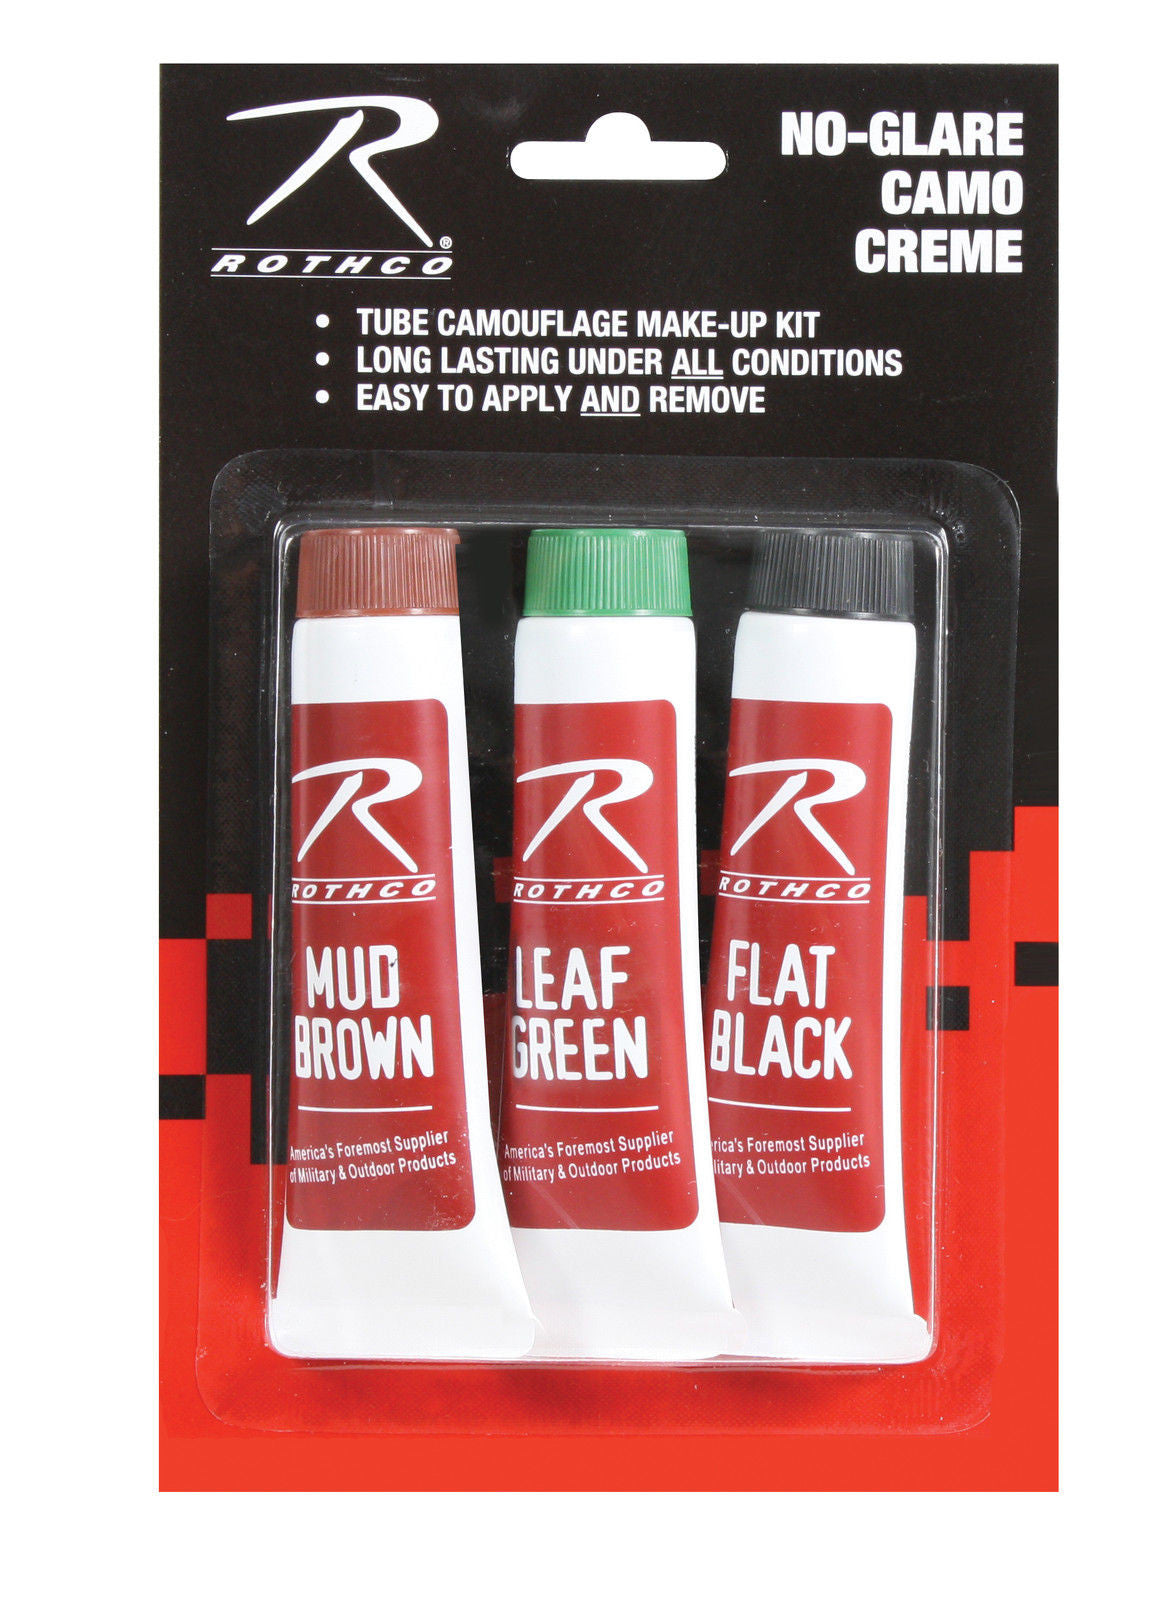 Camouflage Camo Face Paint Creme Tubes  - Leaf Green, Mud Brown, Black